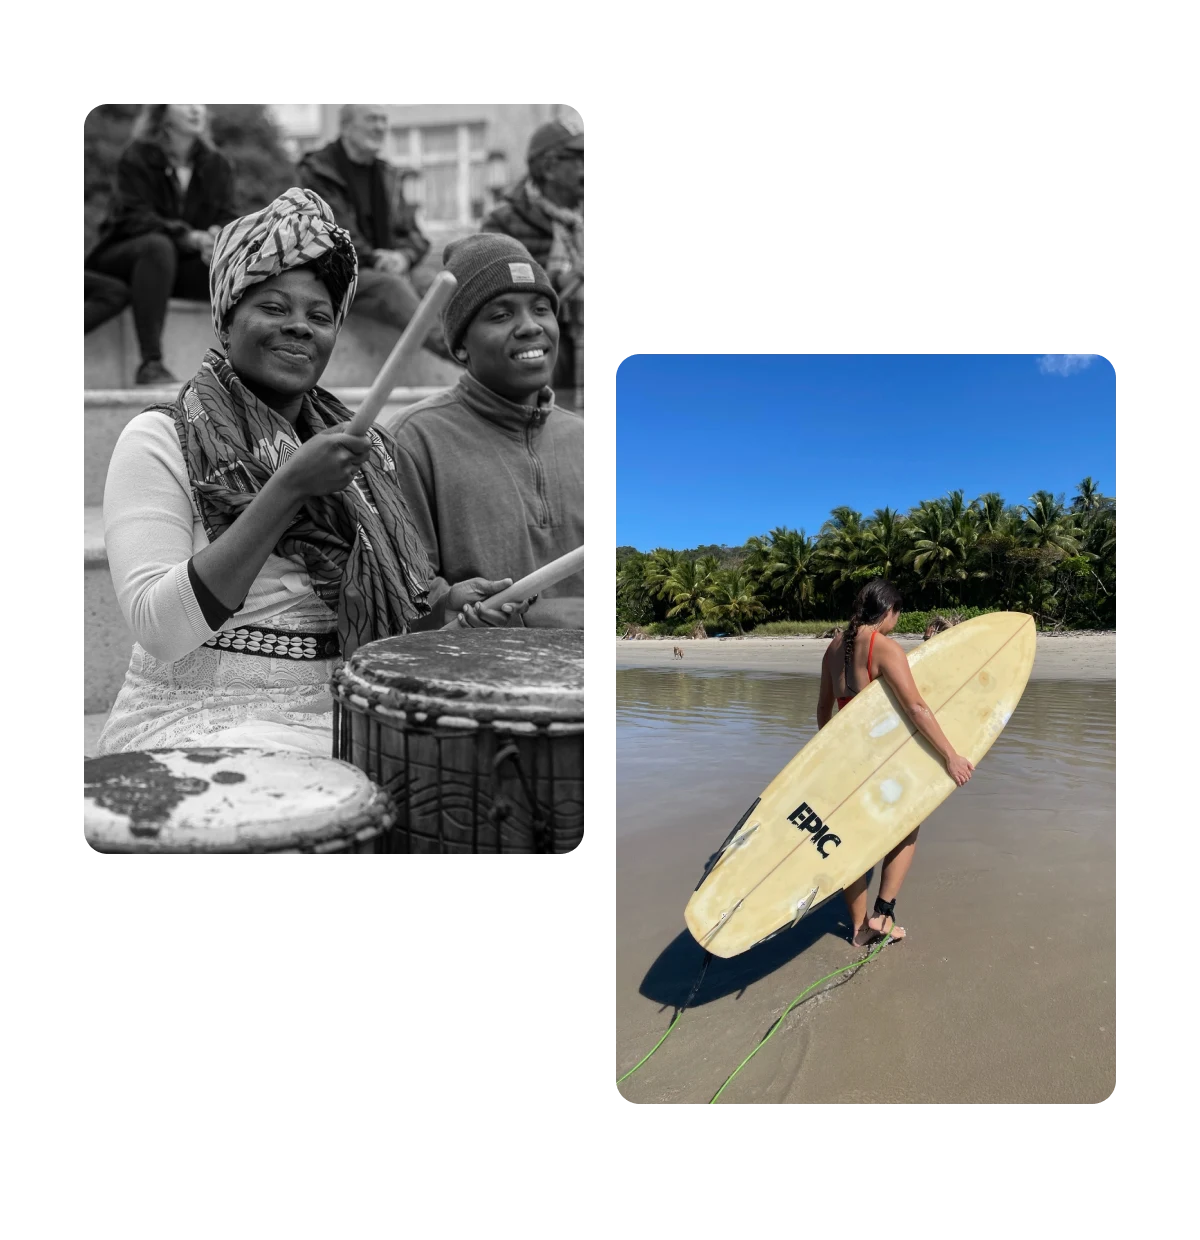 Two pins, black woman playing drums, woman carrying surf board